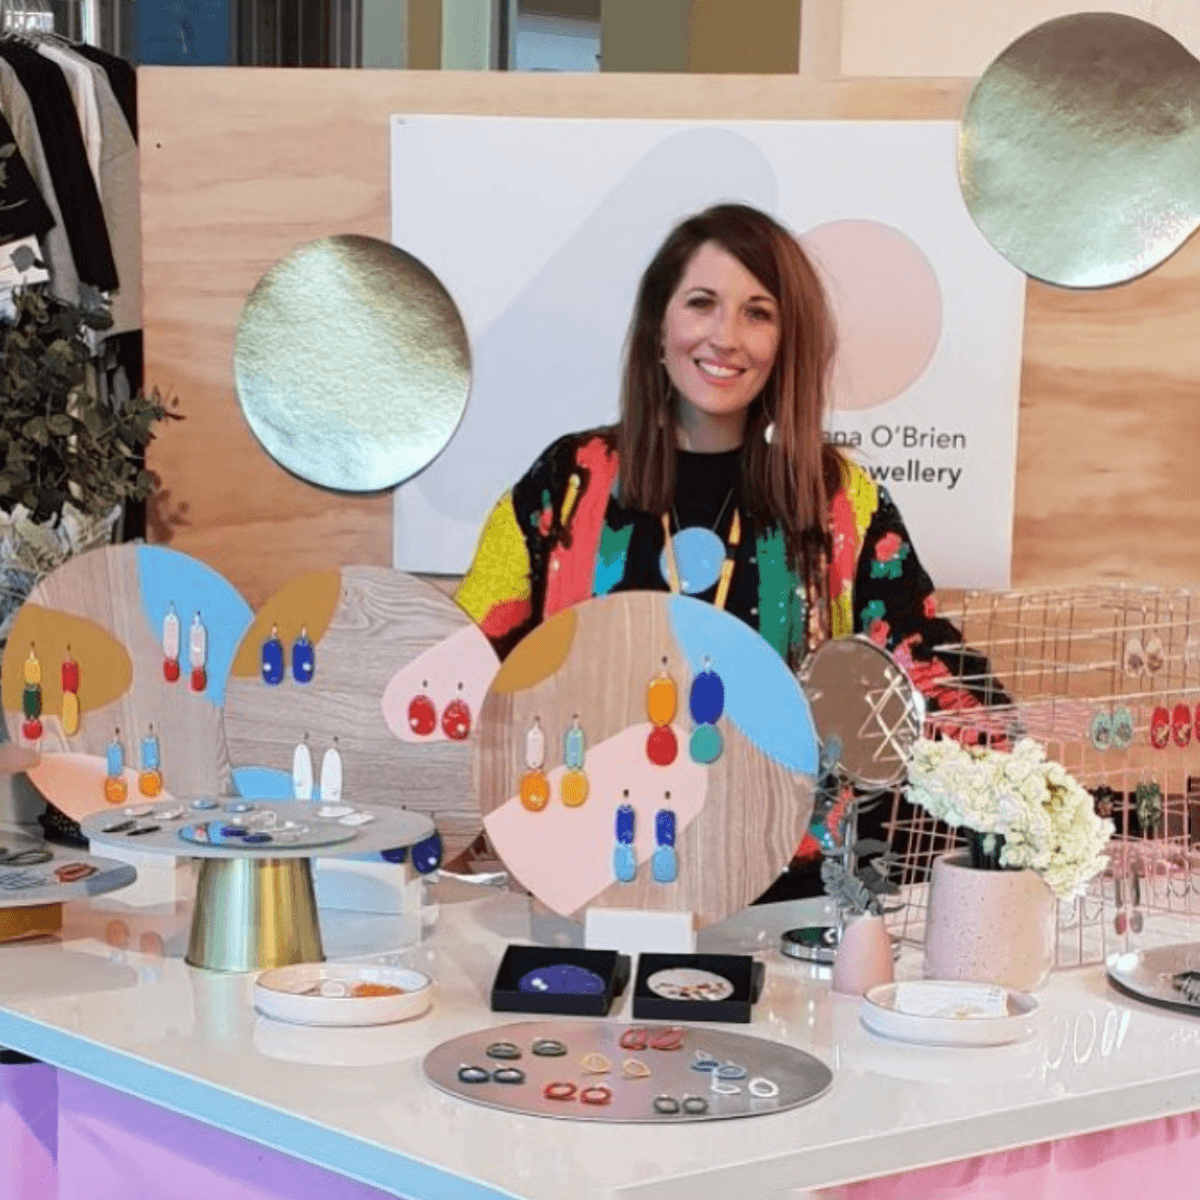 Jenna O’Brien sits at a market table selling colourful enamel jewellery